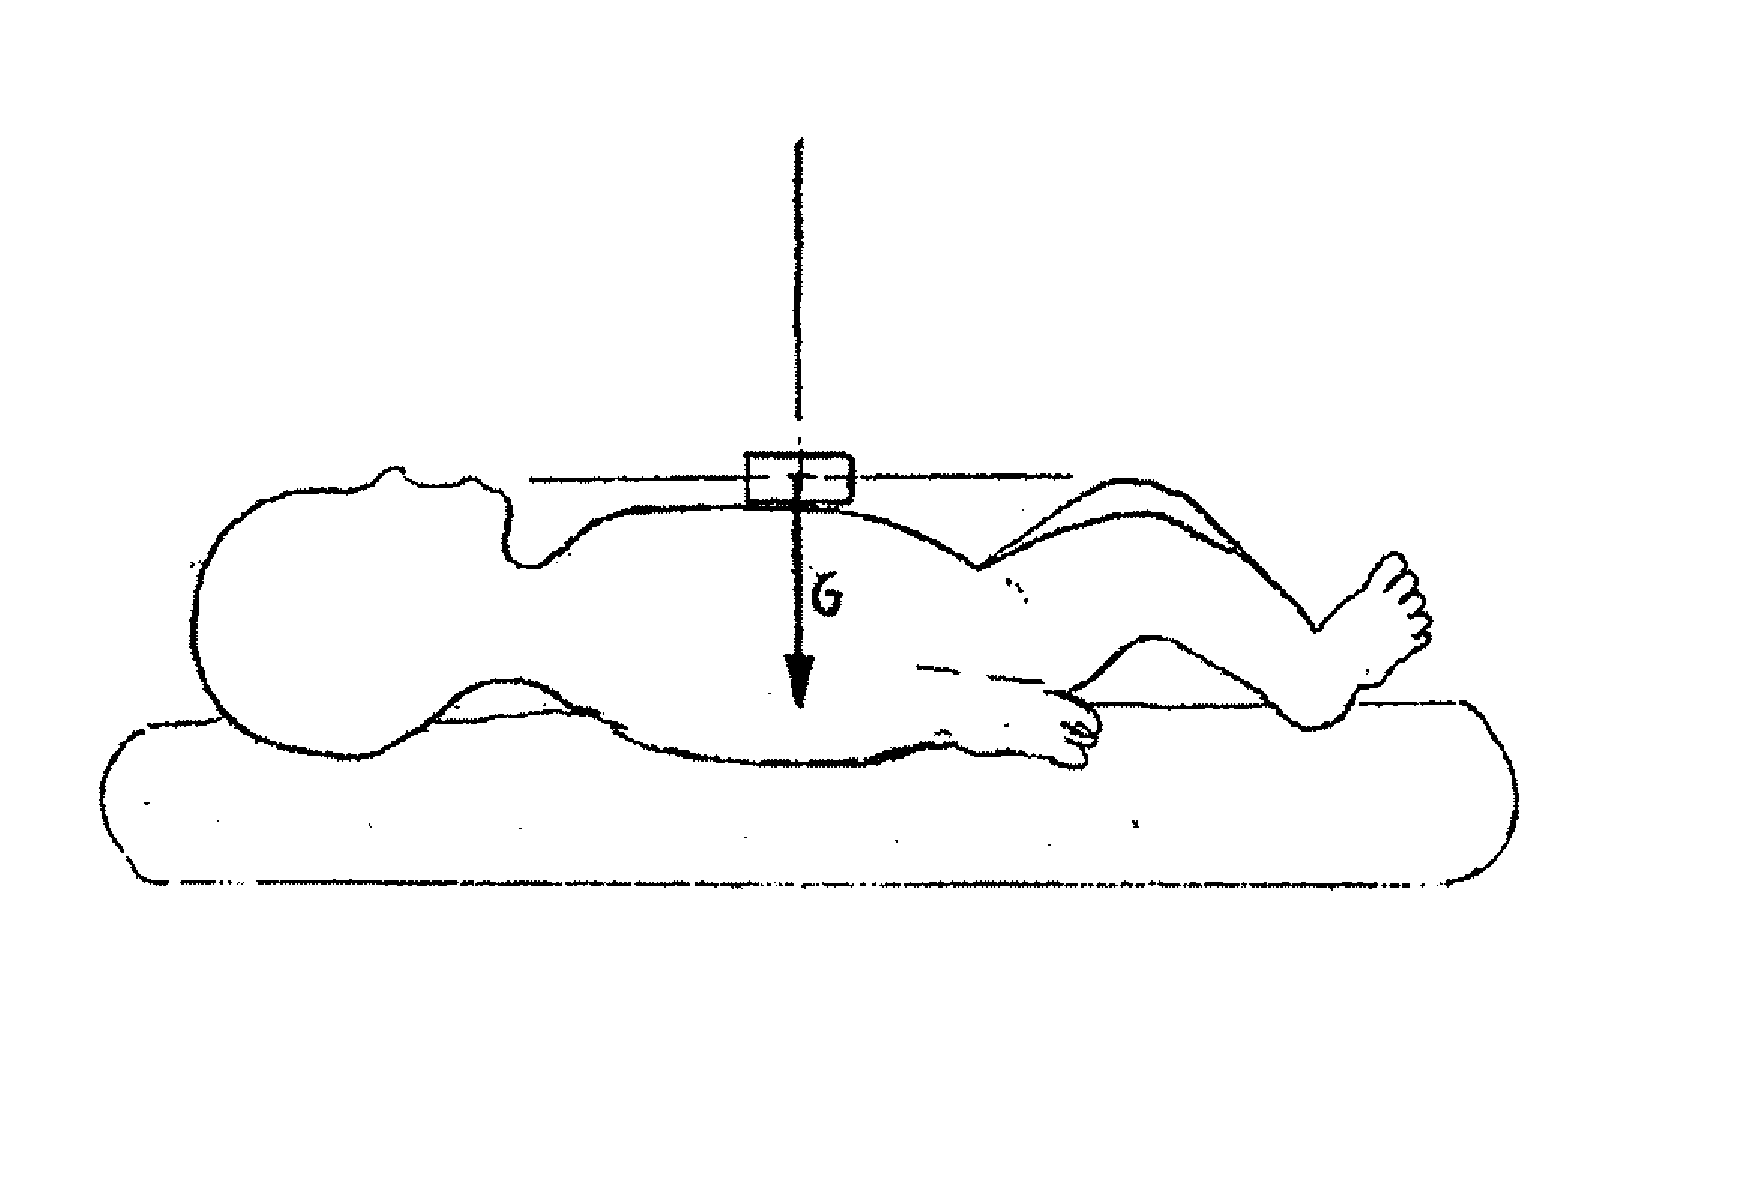 Device for Monitoring Respiratory Movements